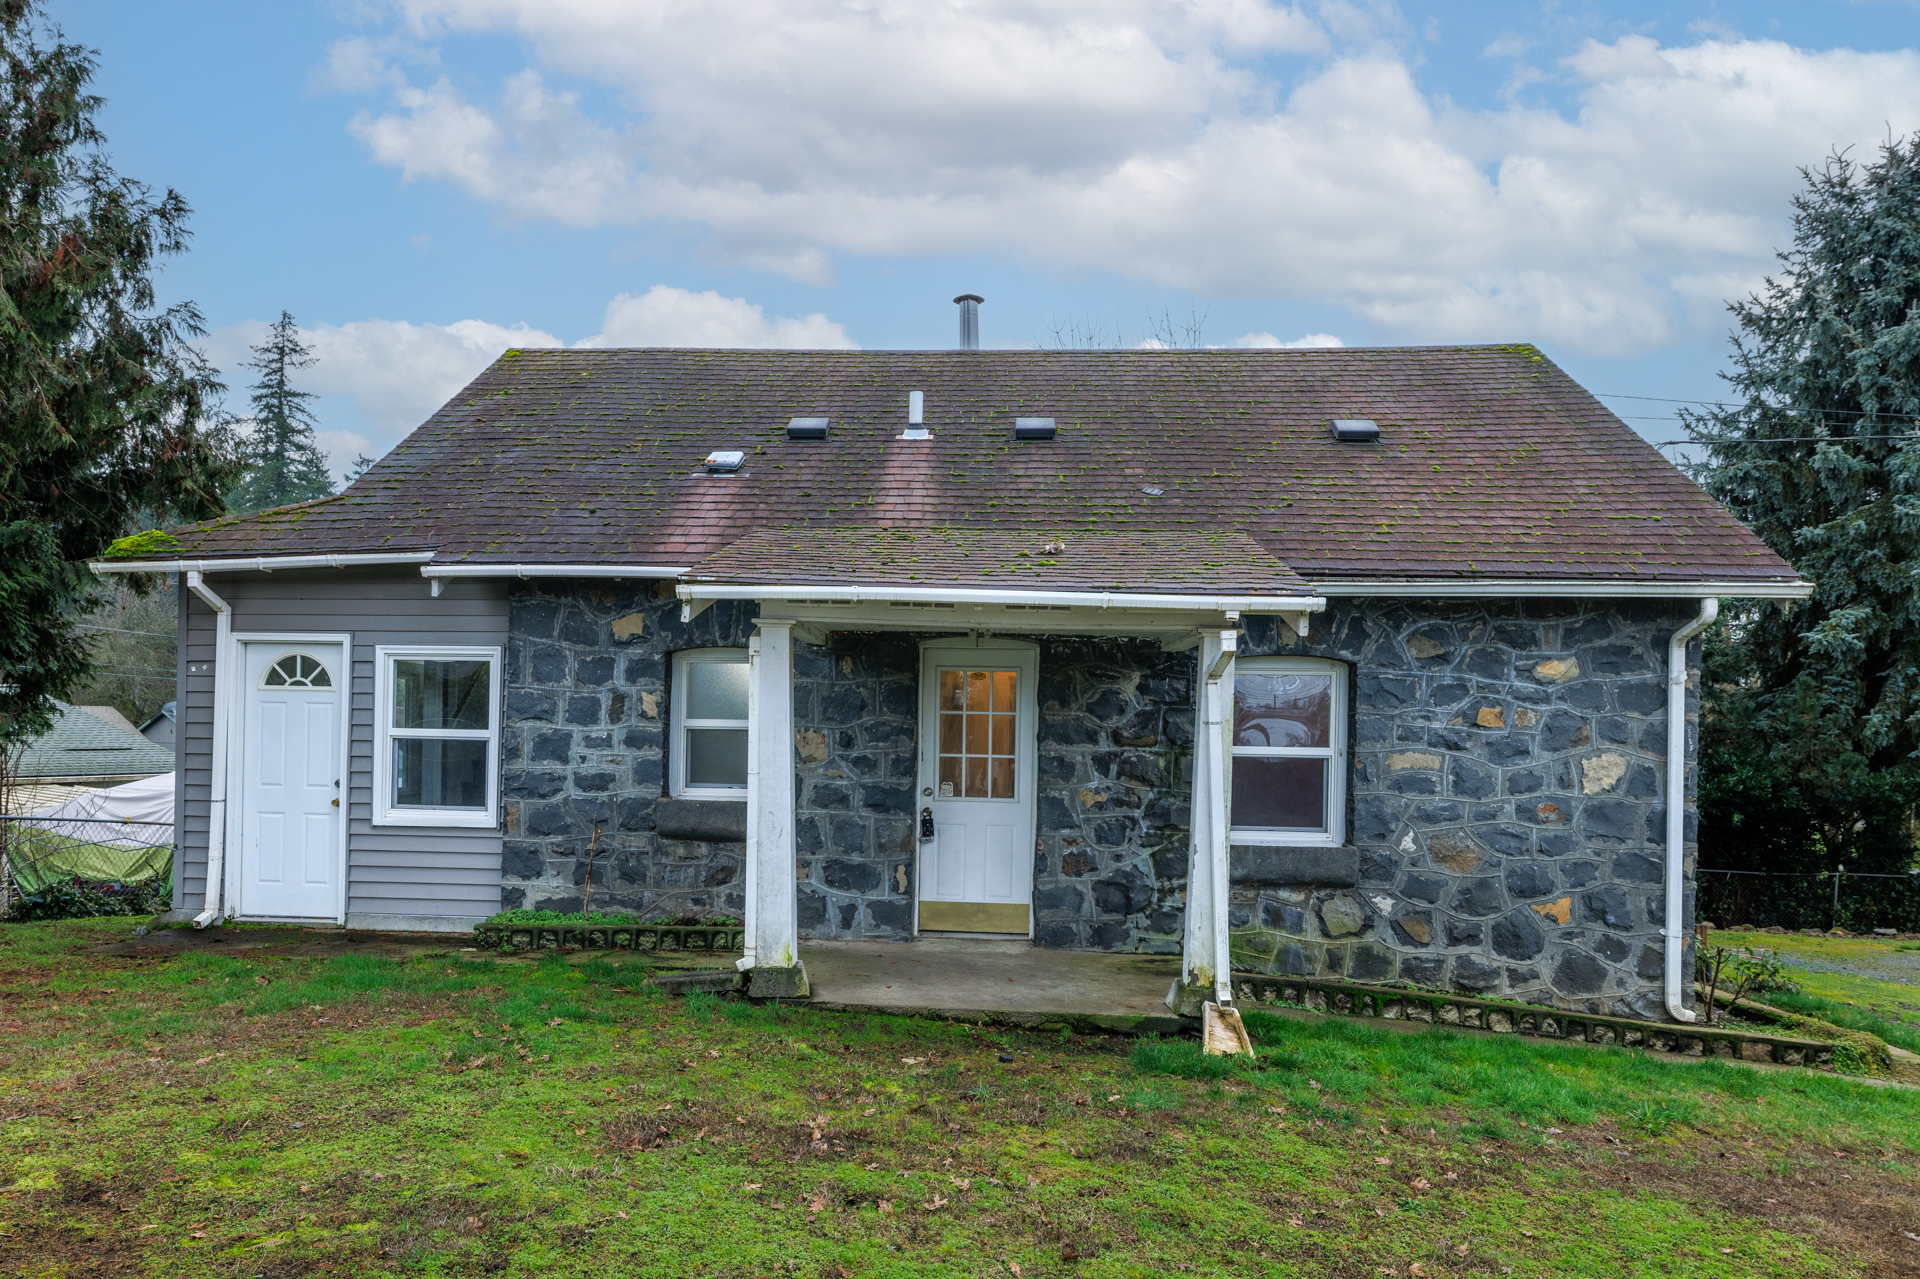 Off Market! Adorable stone cottage in the heart of ST Helens, OR (Columbia County)